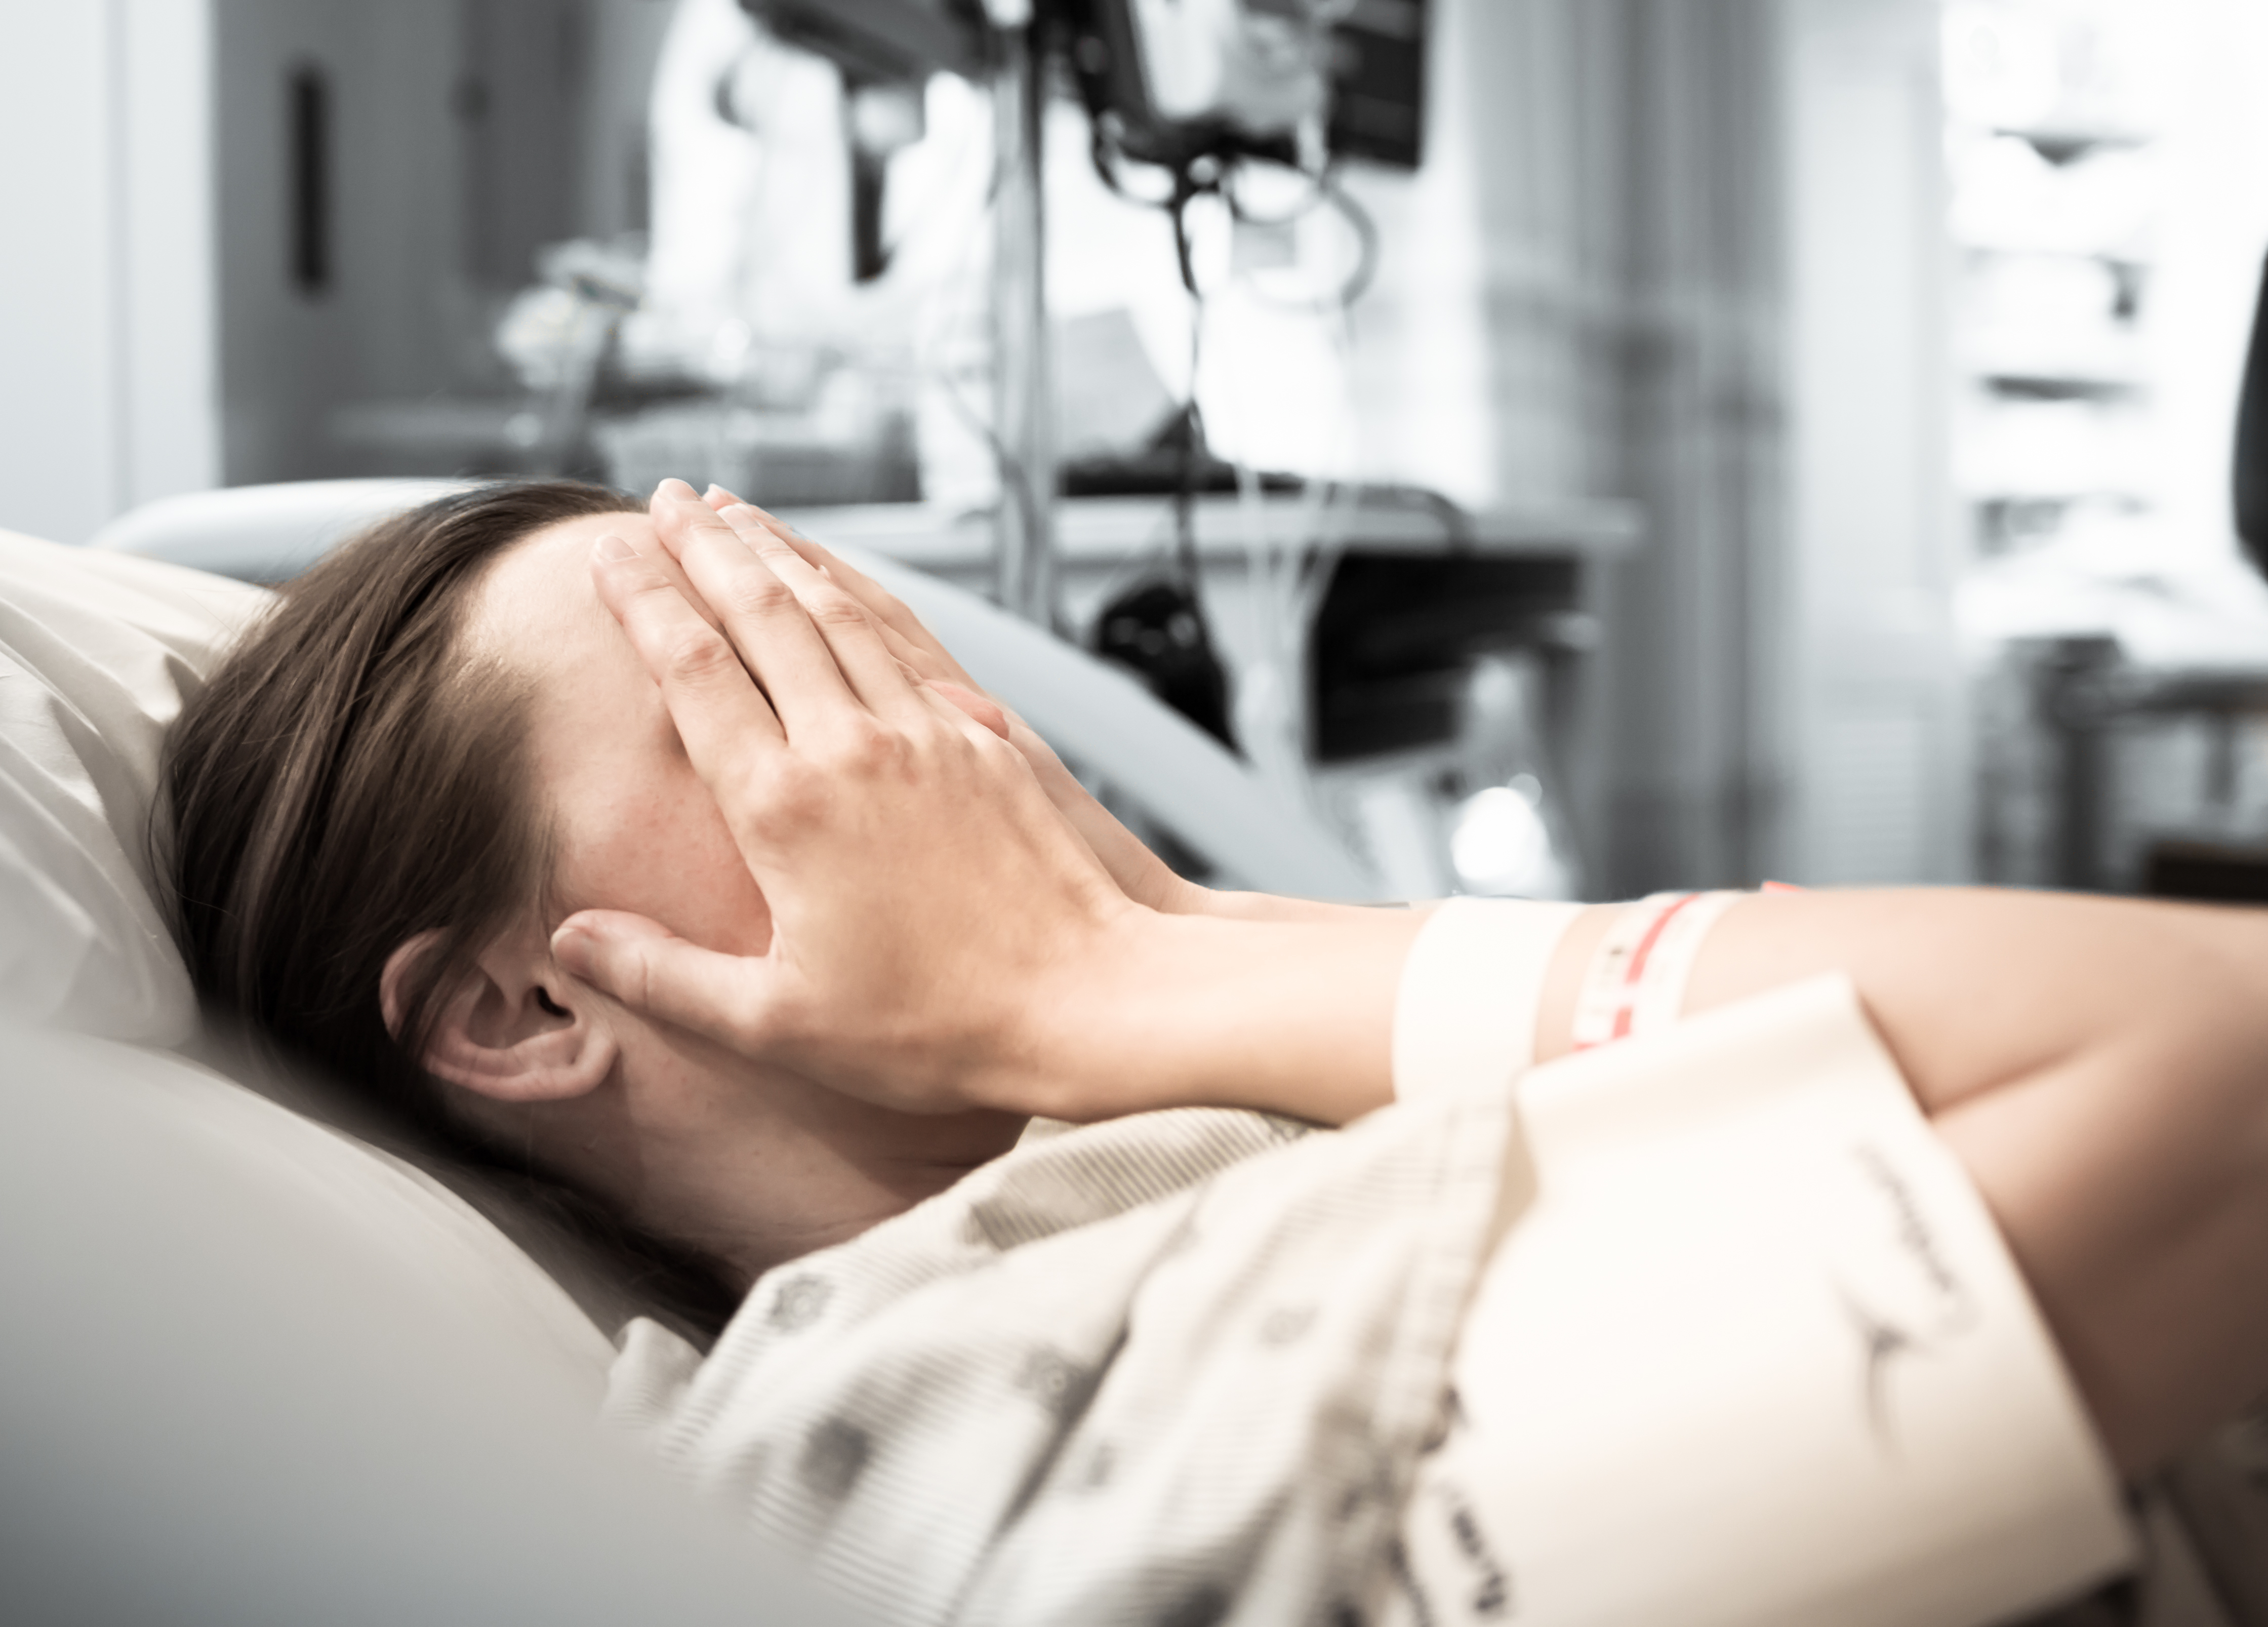 Young woman patient lying at hospital bed | Source: Shutterstock